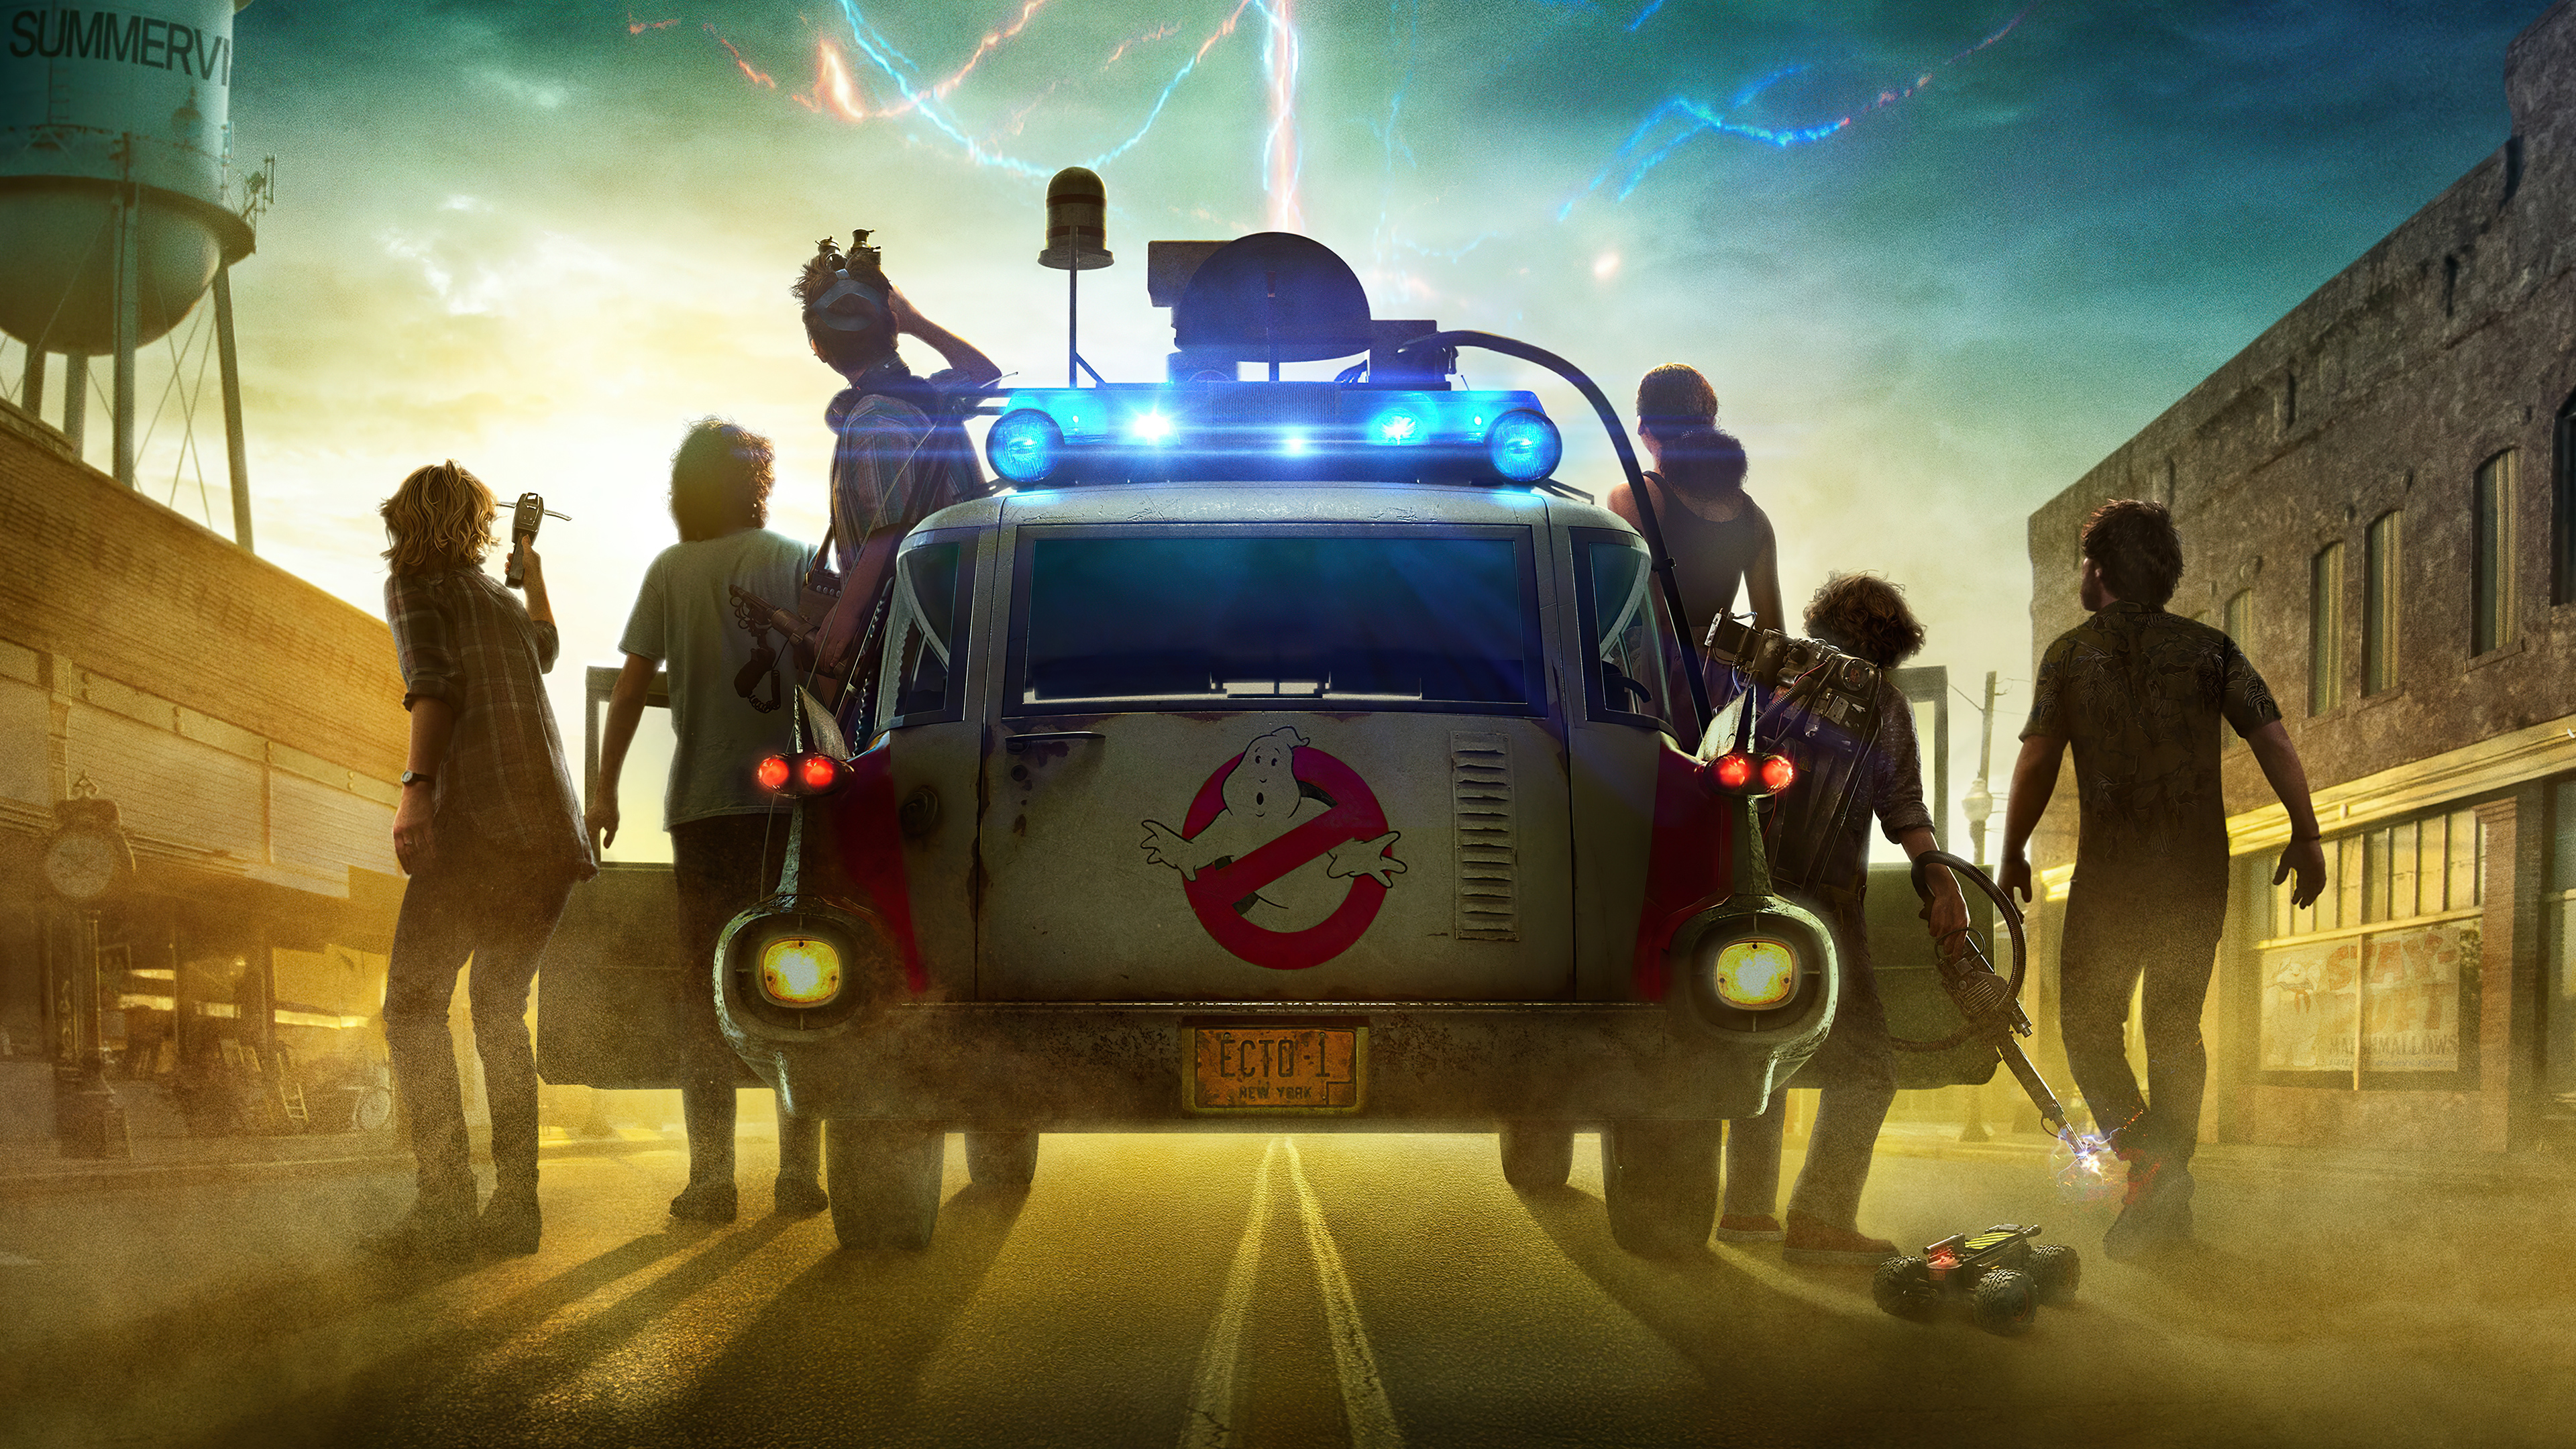 Ghostbusters afterlife free download watts app new version